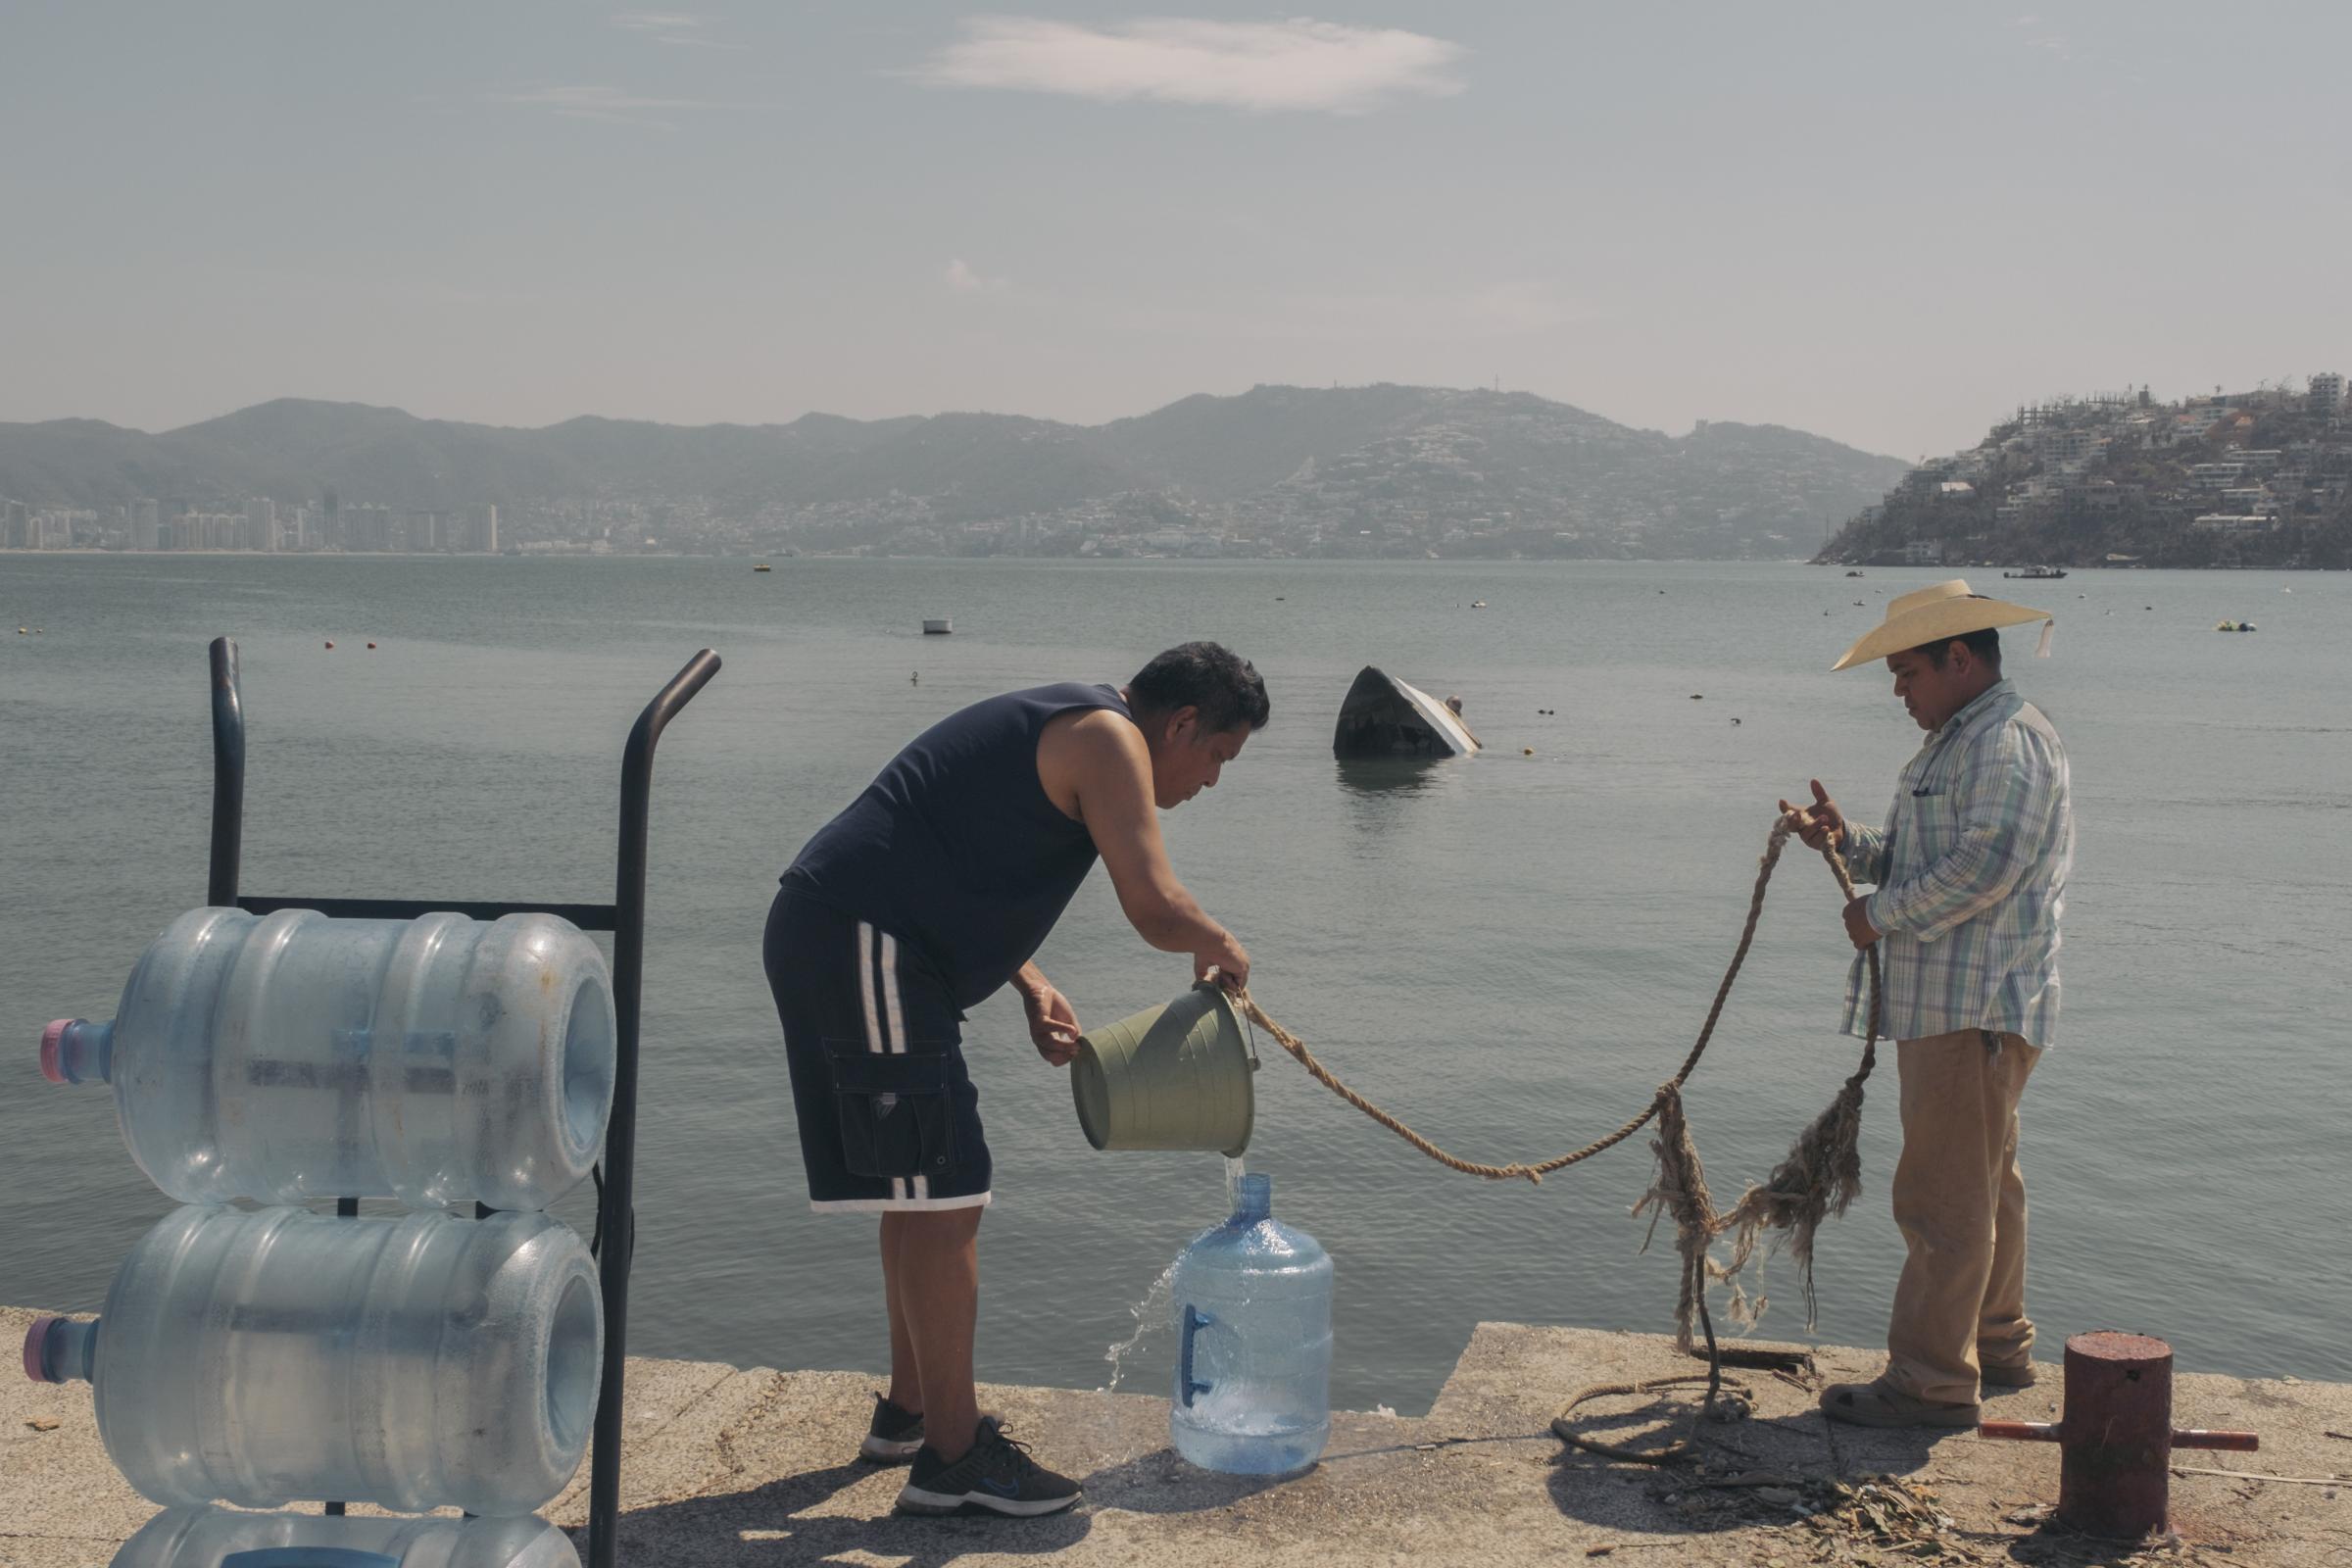 Acapulco - Hurricane Otis - With no running water available, residents living by the...